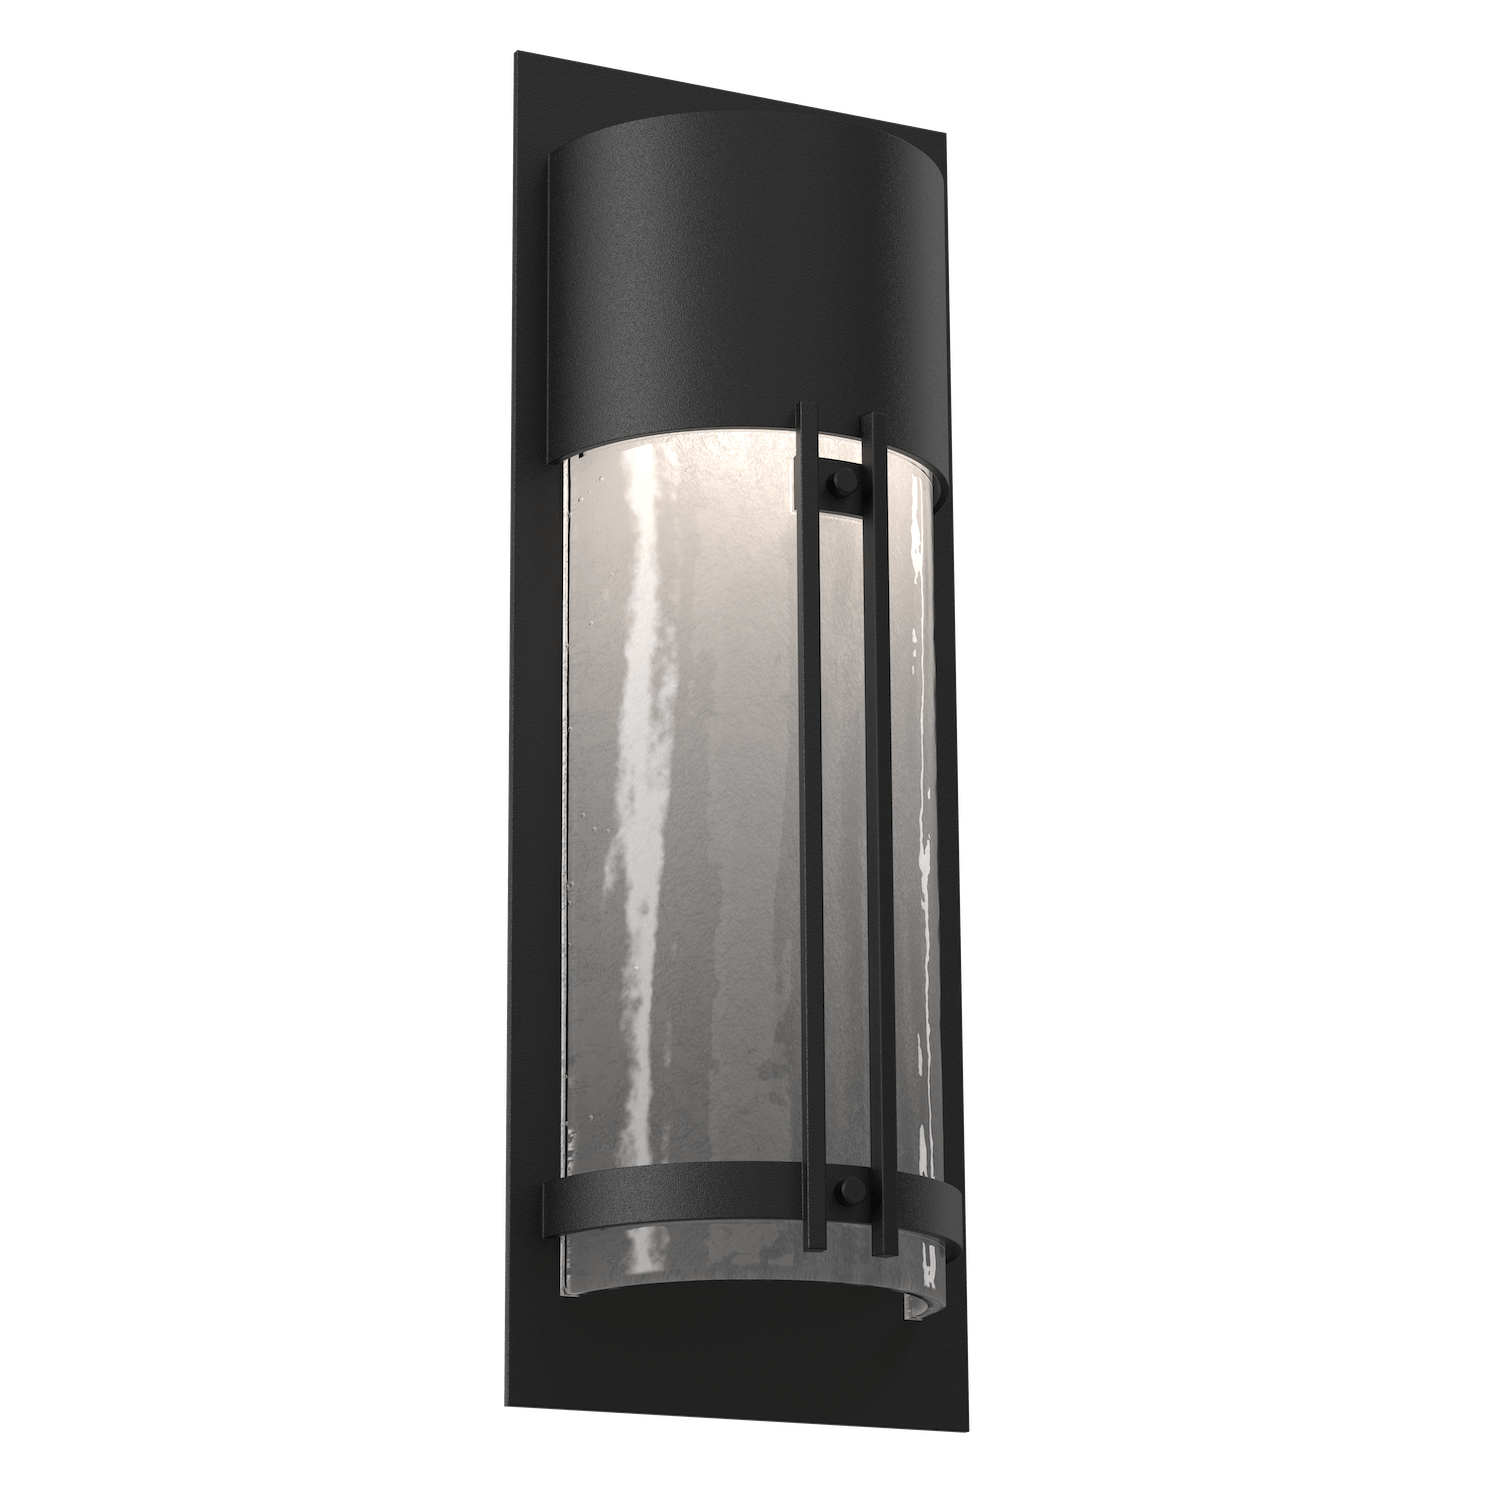 ODB0054-19-TB-FG-Hammerton-Studio-19-inch-outdoor-sconce-with-half-round-frosted-granite-glass-cover-with-textured-black-finish-and-LED-lamping